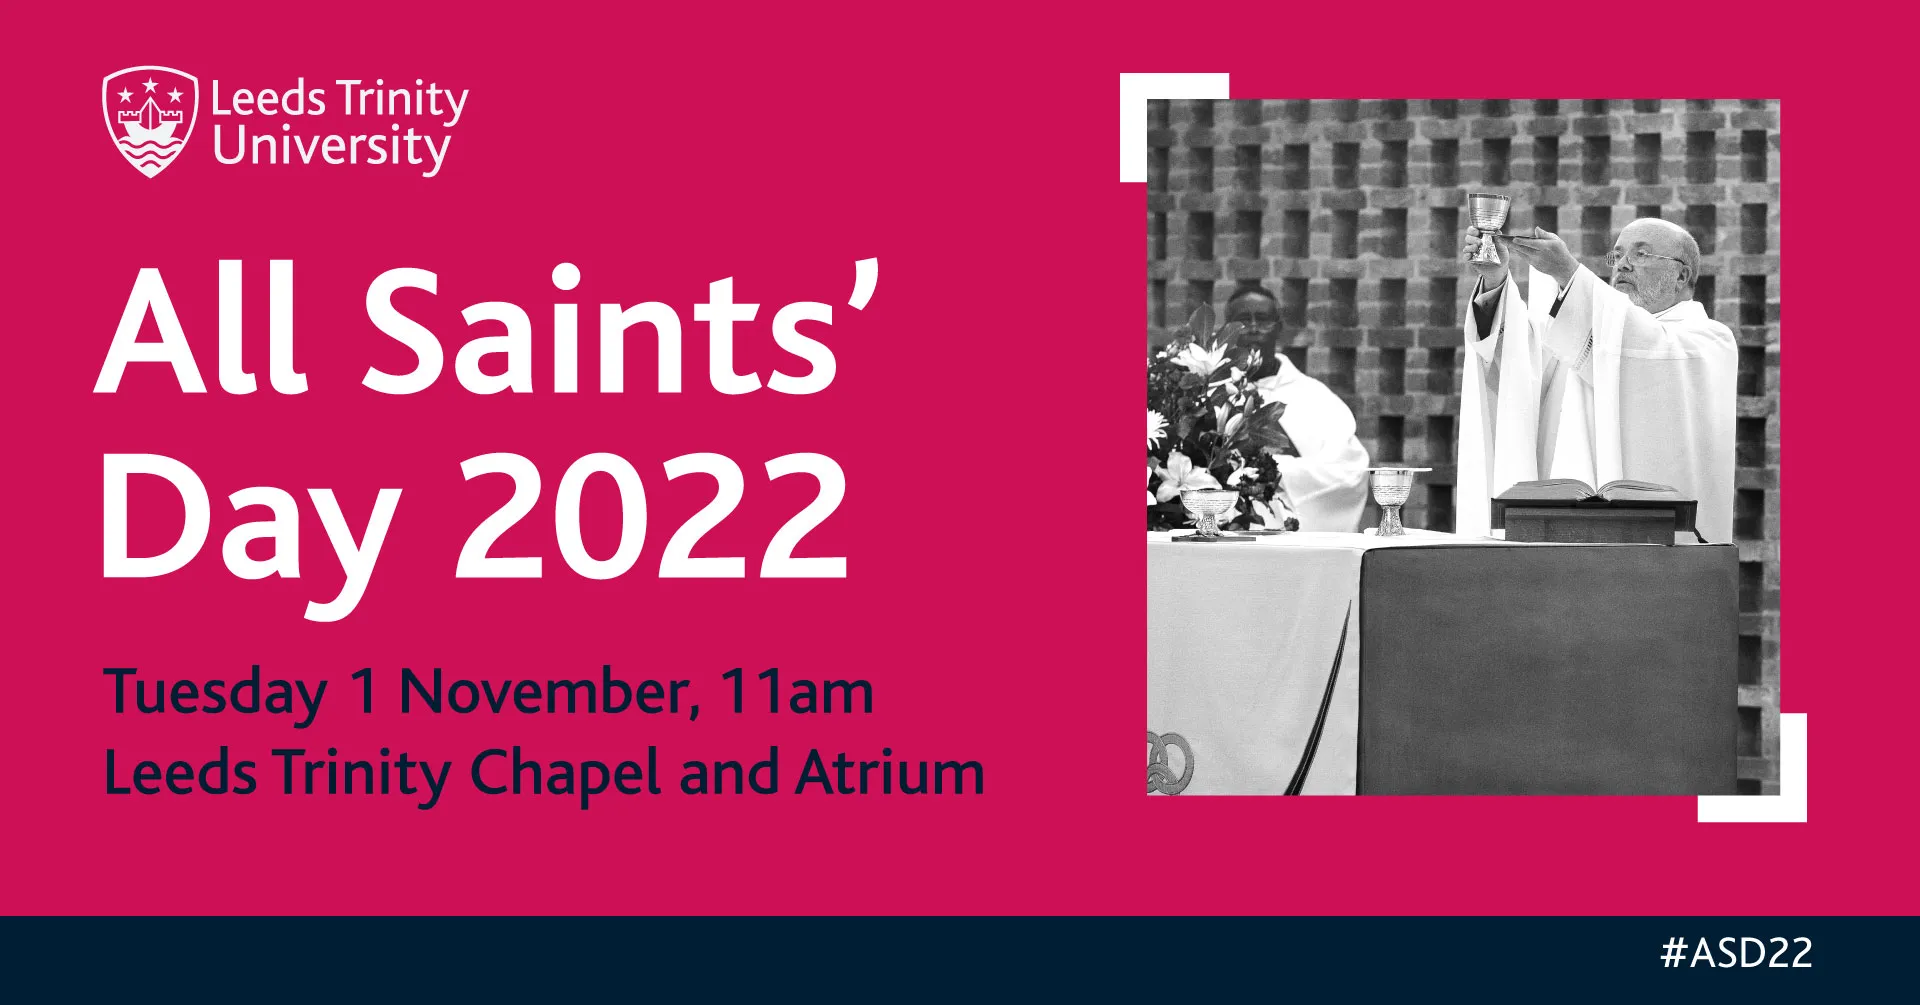 A red, white and black graphic with an image of the Bishop of Leeds - with text saying: Tuesday 1 November, 11am, Leeds Trinity Chapel and Atrium.